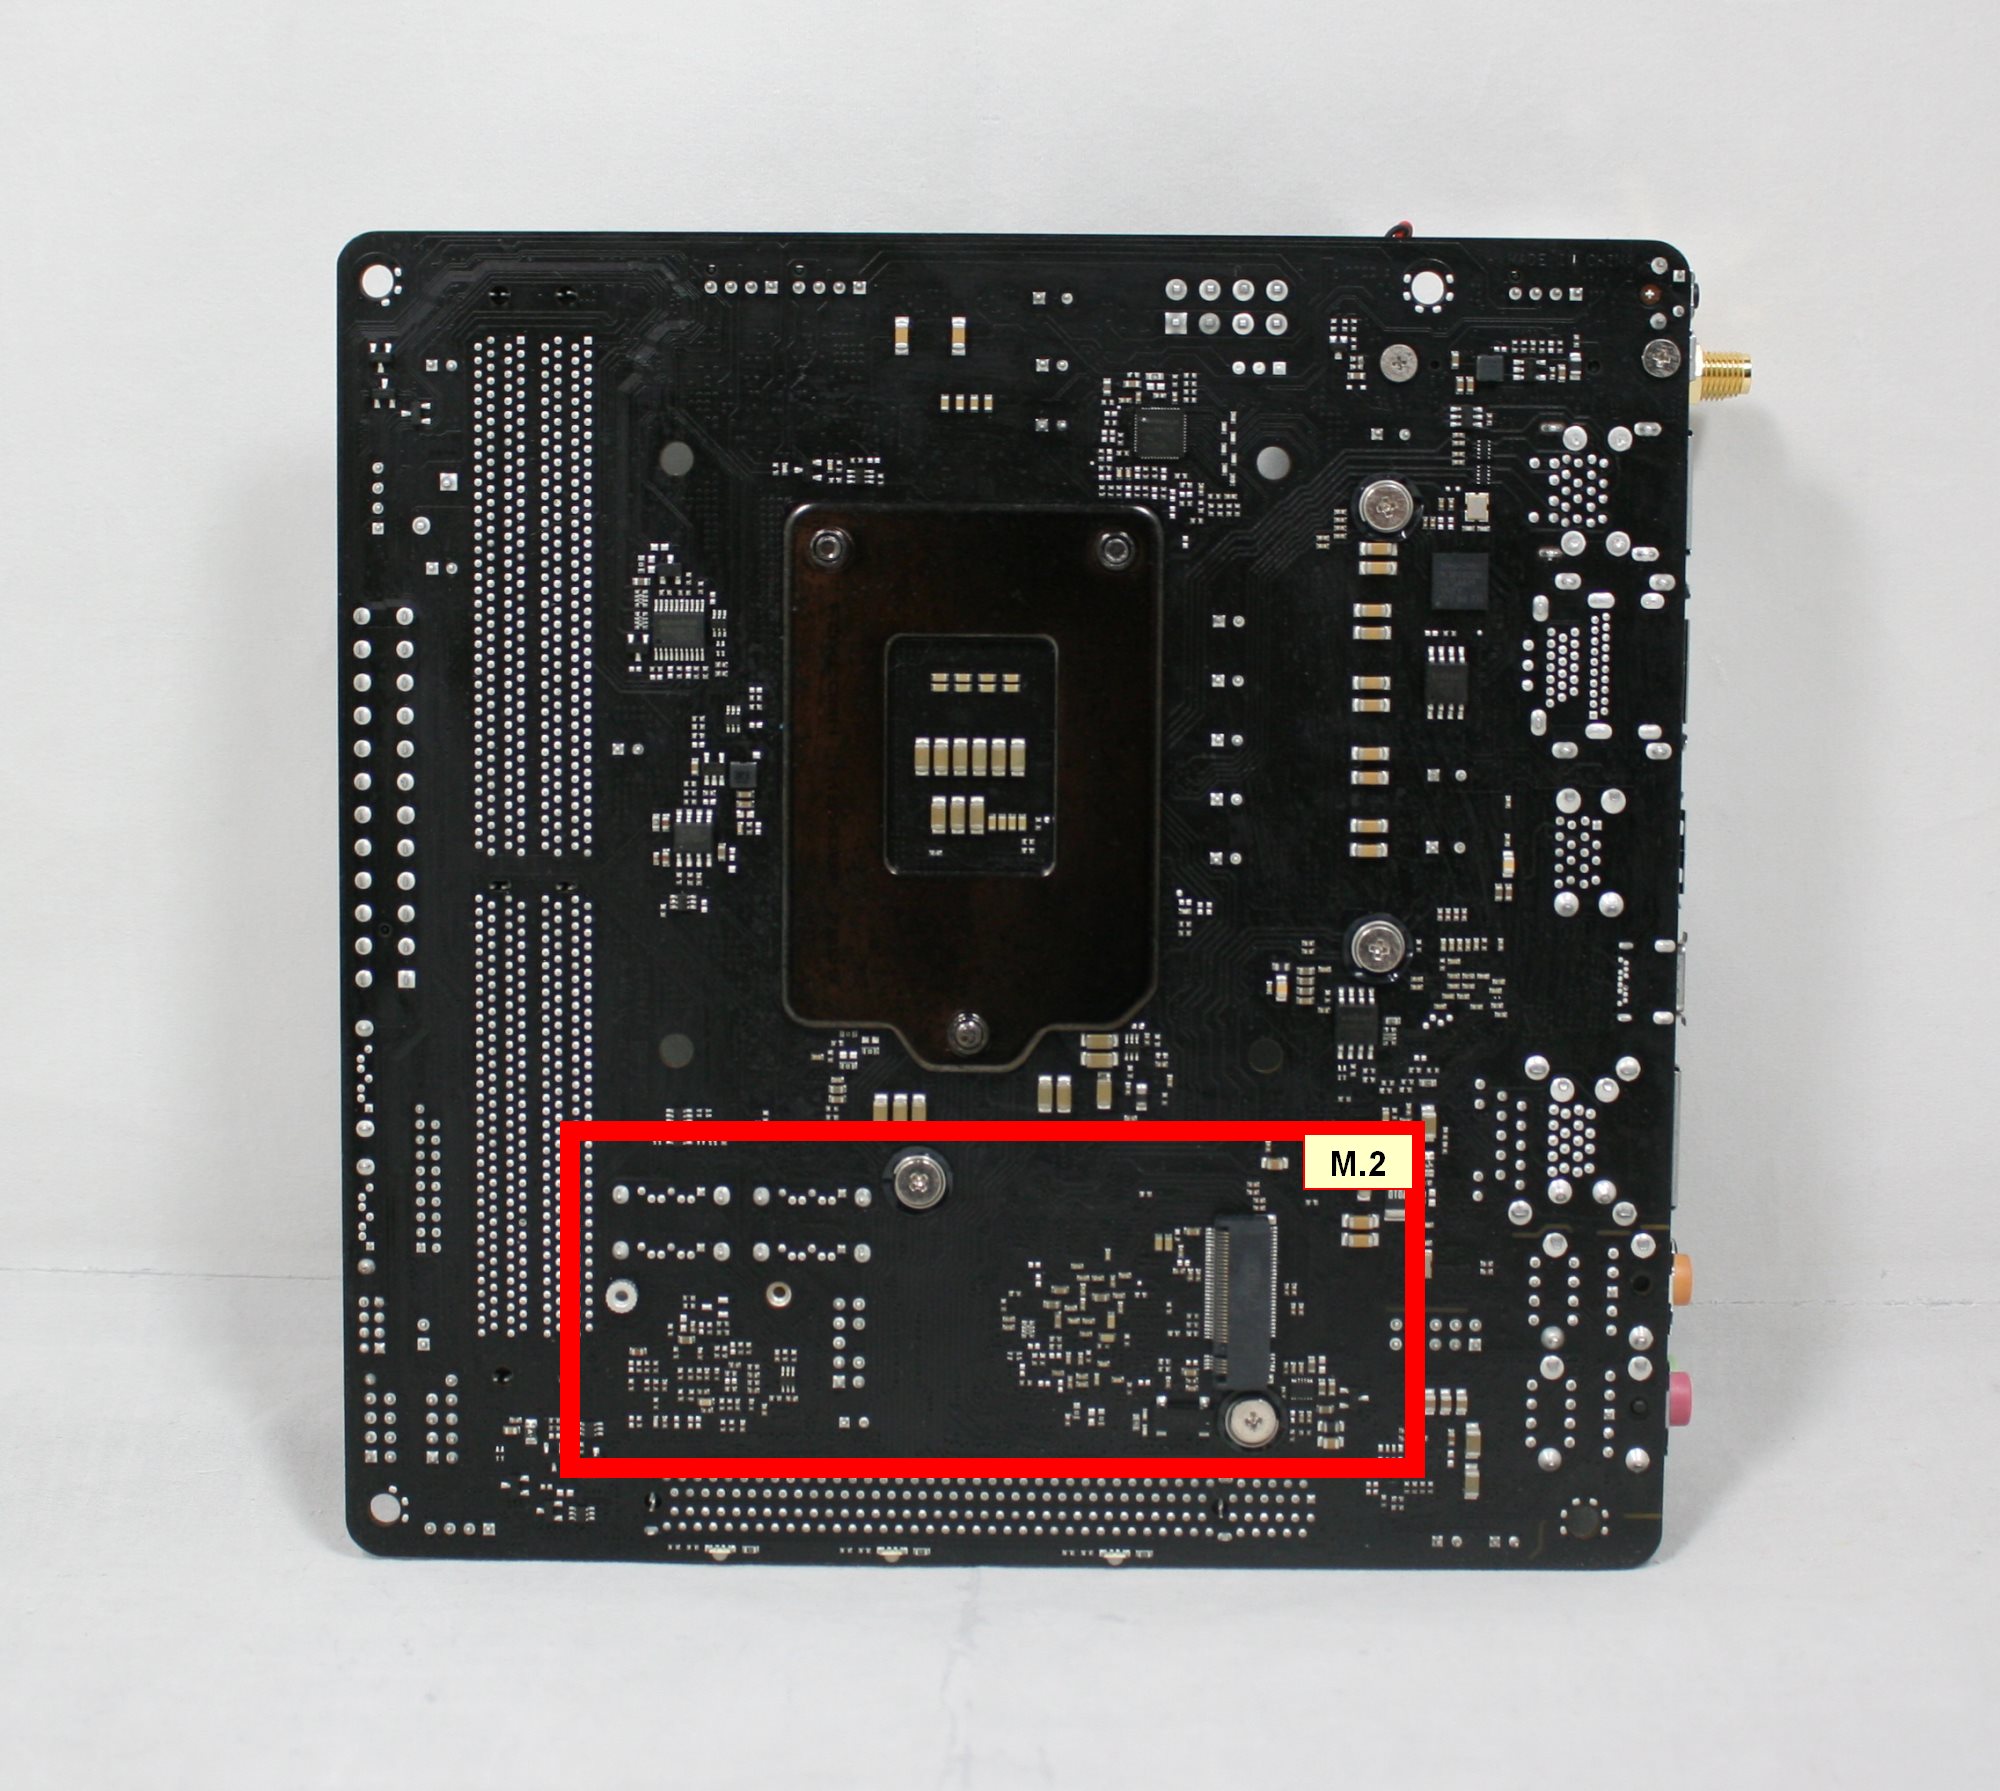 Visual Inspection The Asrock Z370 Gaming Itx Ac Motherboard Review Mini Itx With Thunderbolt 3